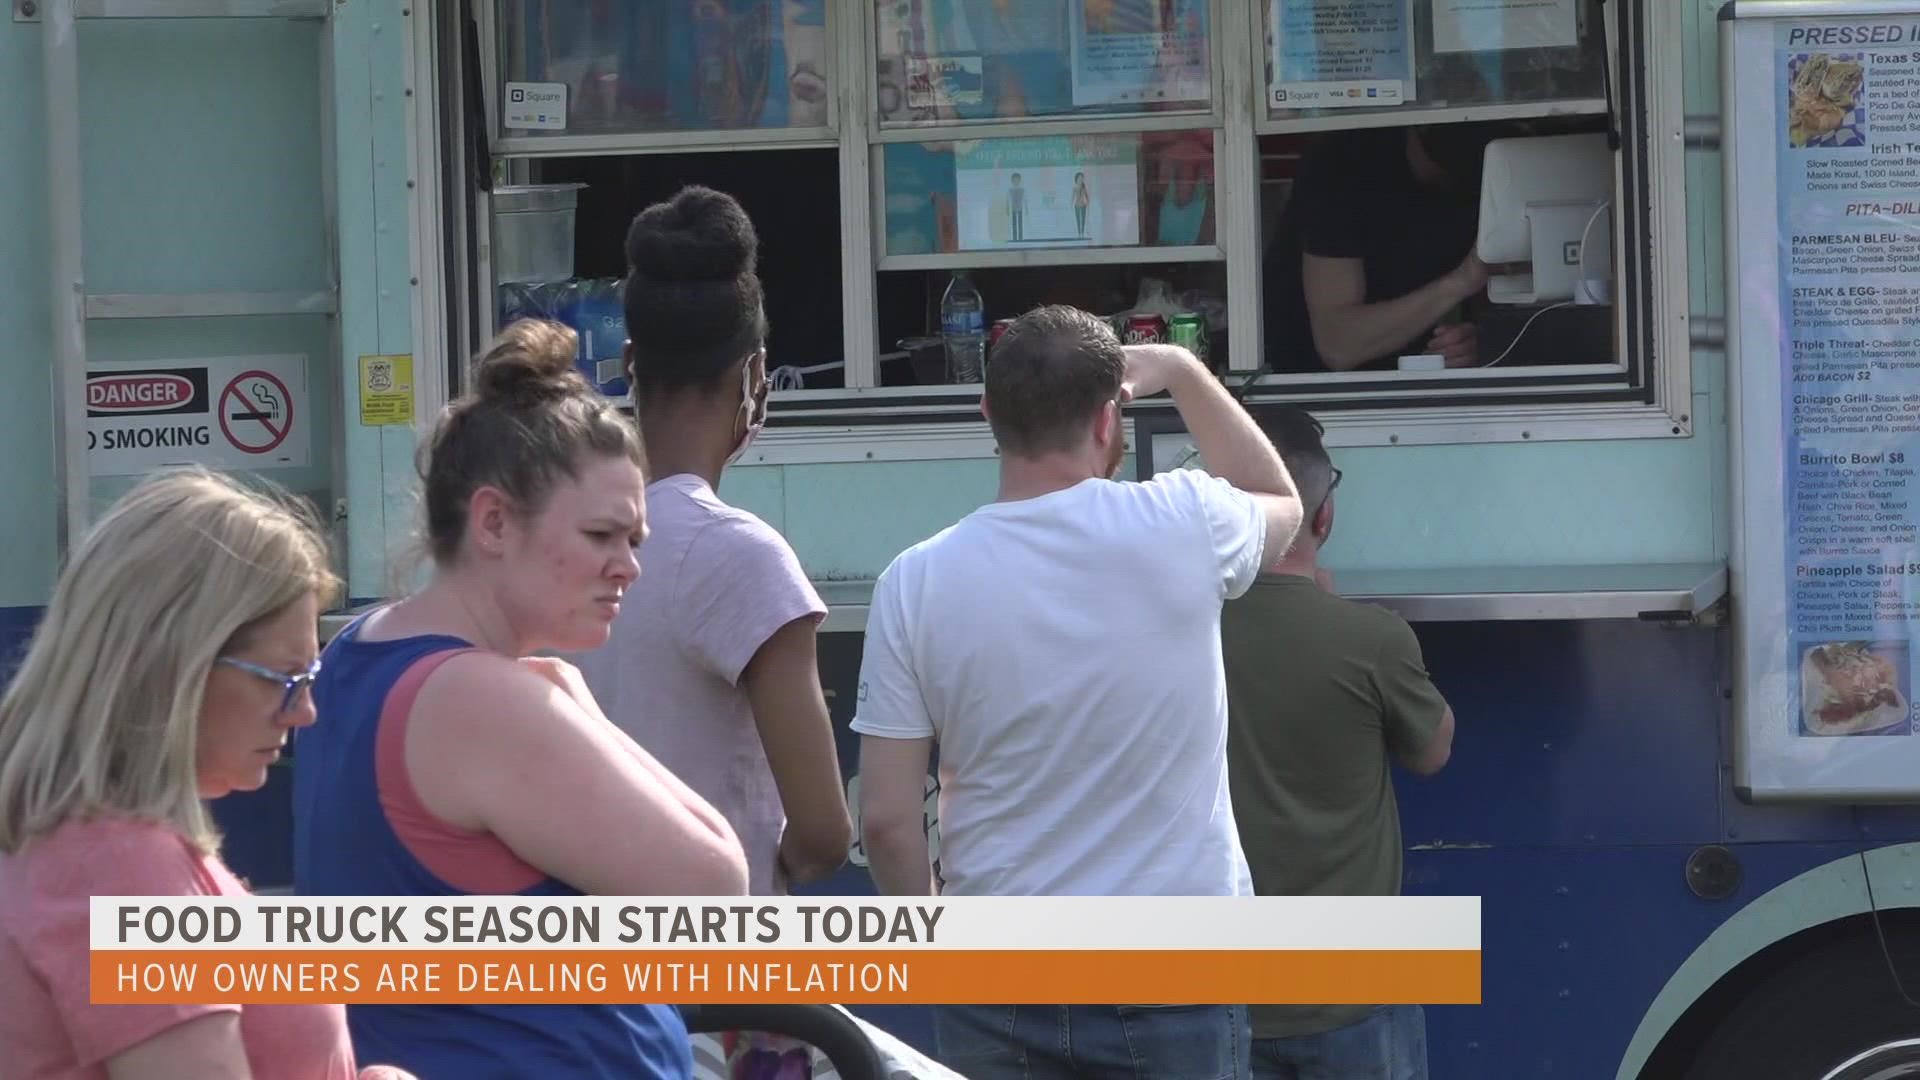 Food truck owners are preparing to kick off food truck season in West Michigan. But how are they dealing with rising costs?